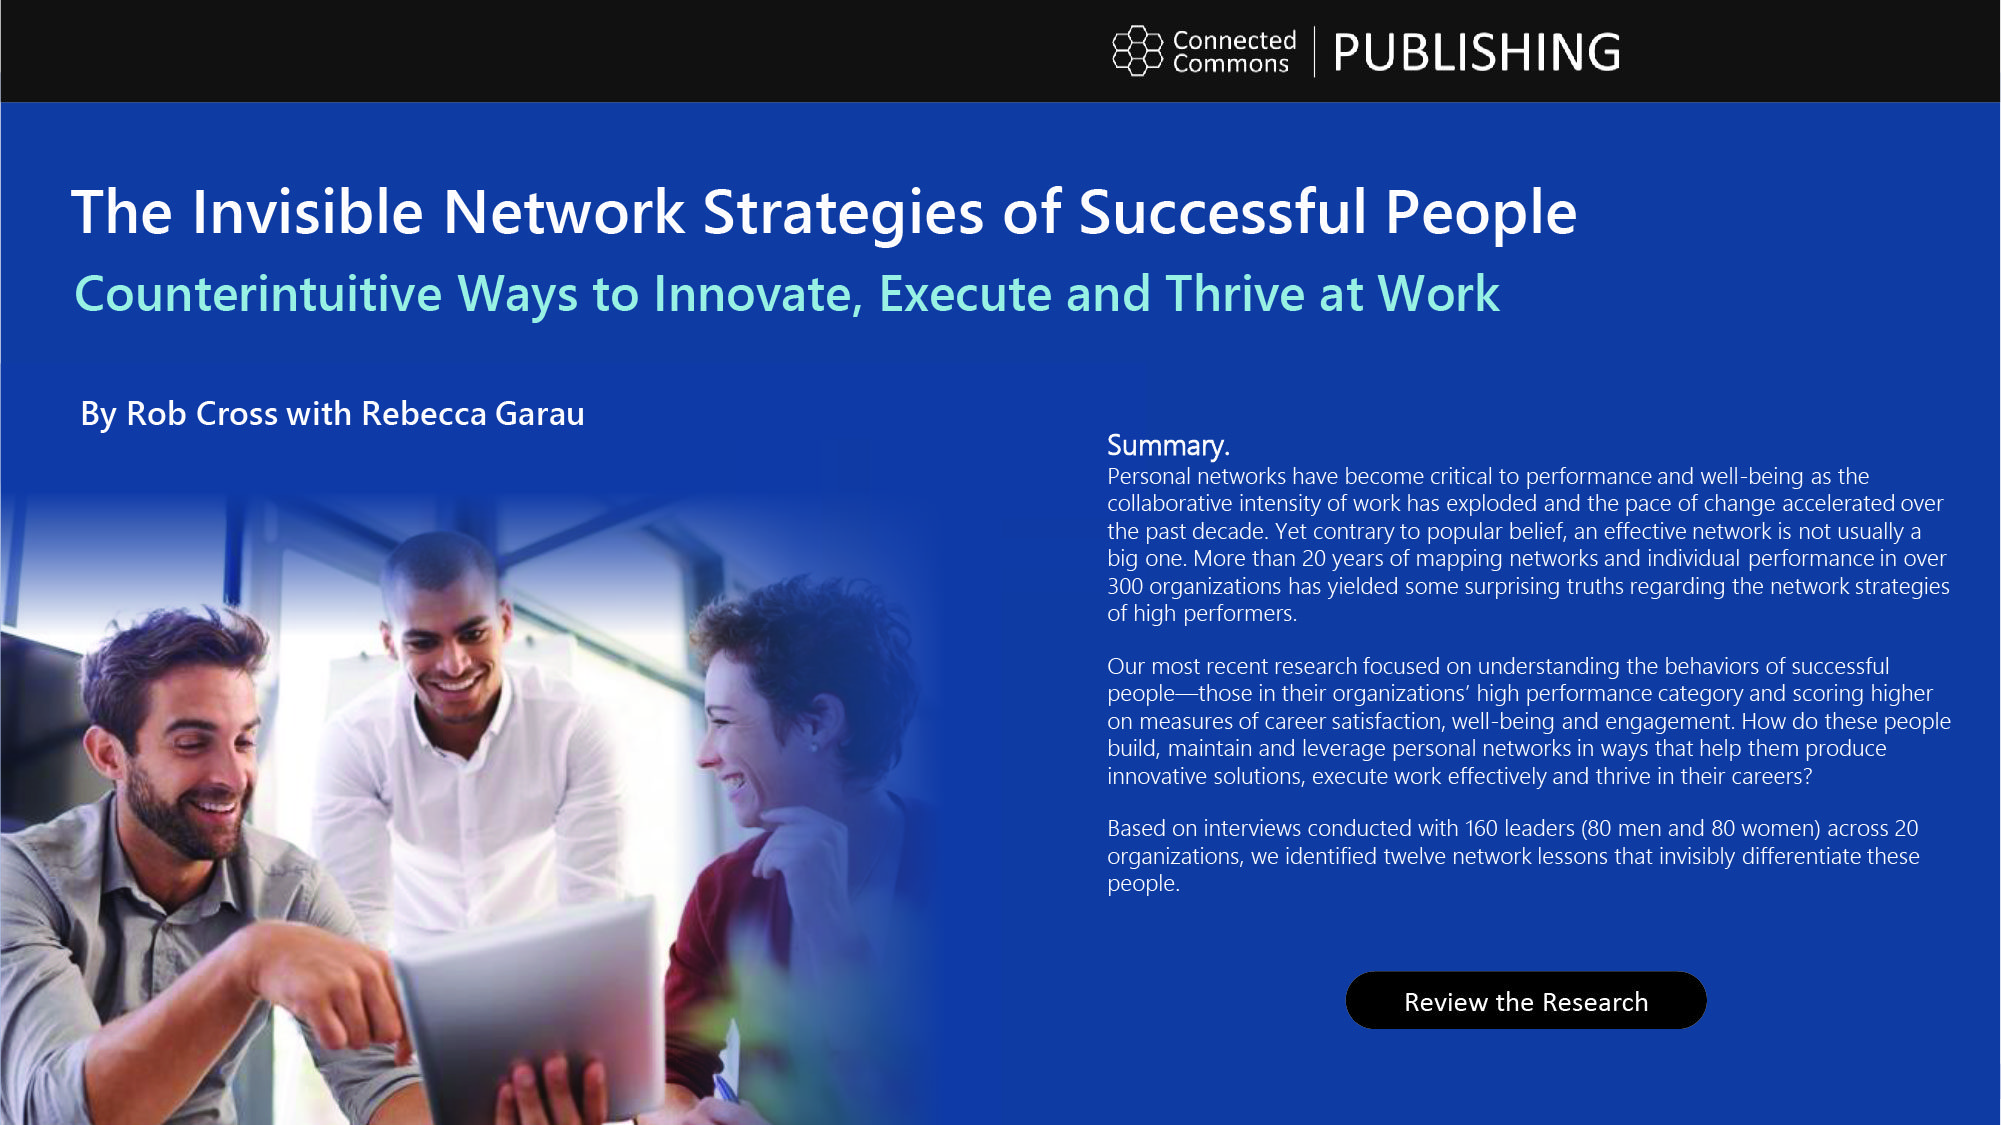 The Invisible Network Strategies of Successful People